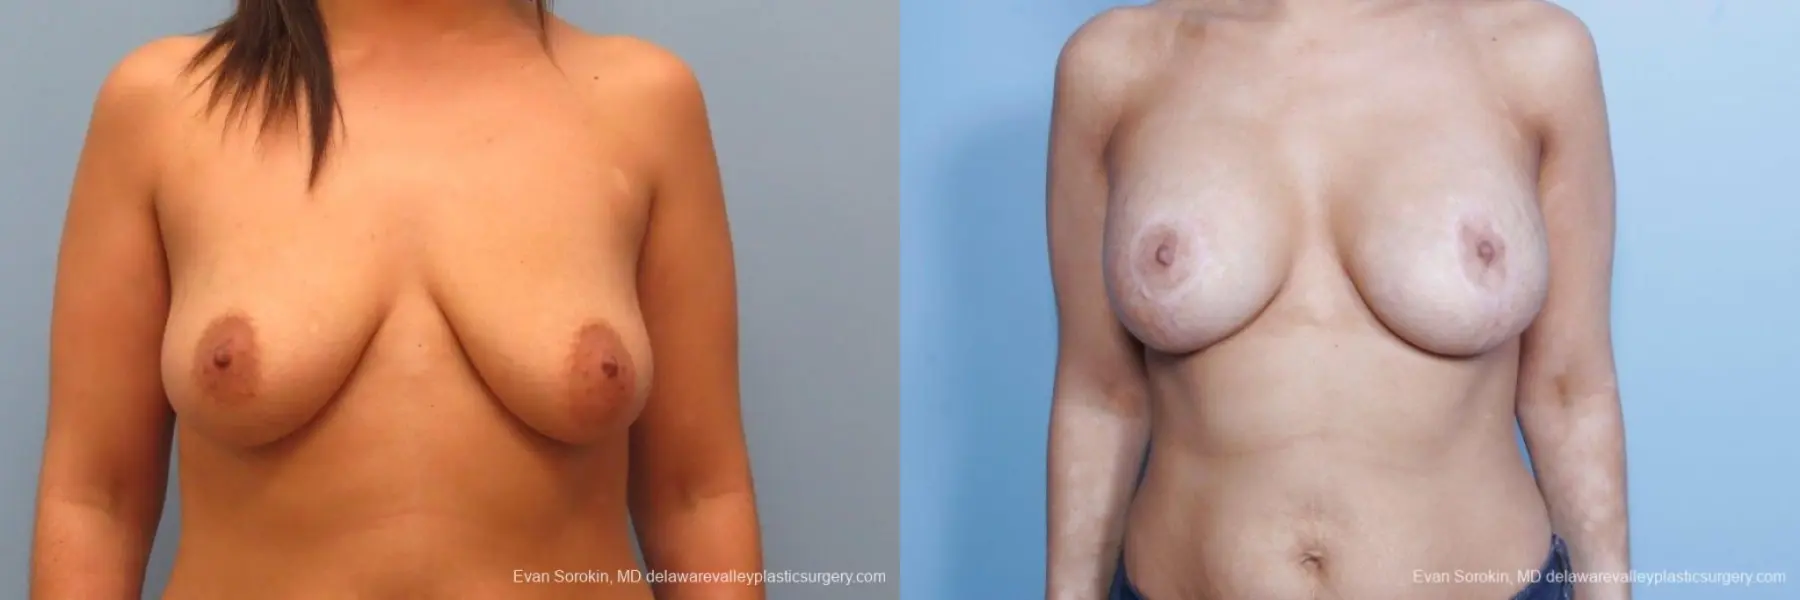 Philadelphia Breast Lift and Augmentation 8688 - Before and After 1